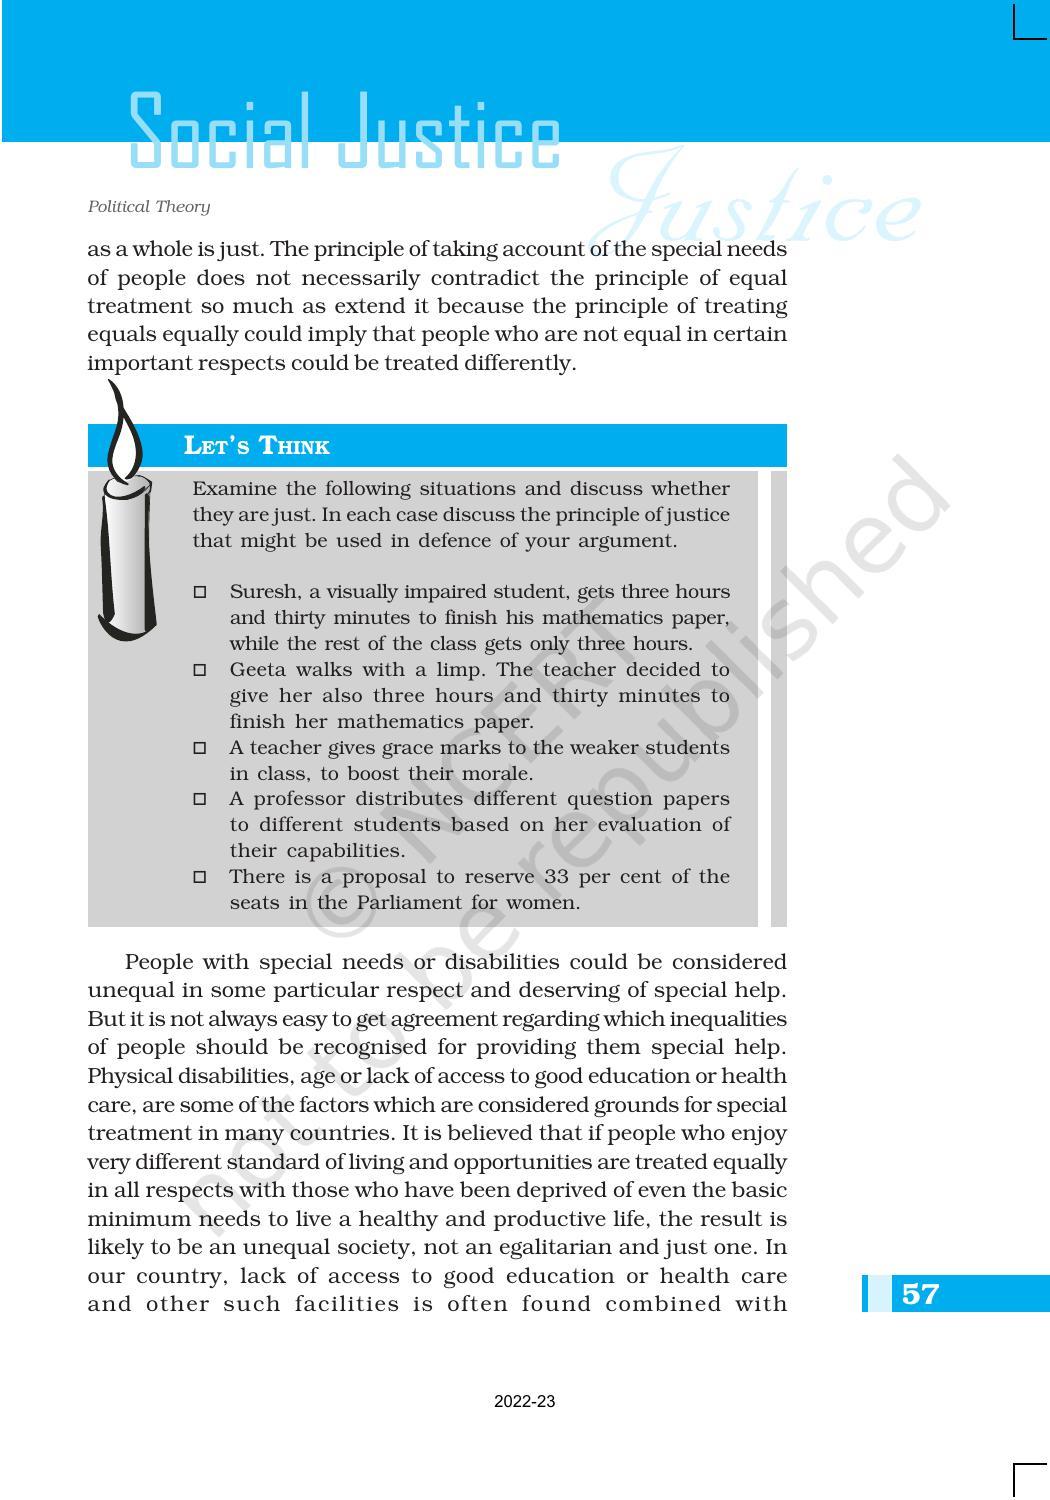 NCERT Book for Class 11 Political Science (Political Theory) Chapter 4 Social Justice - Page 5